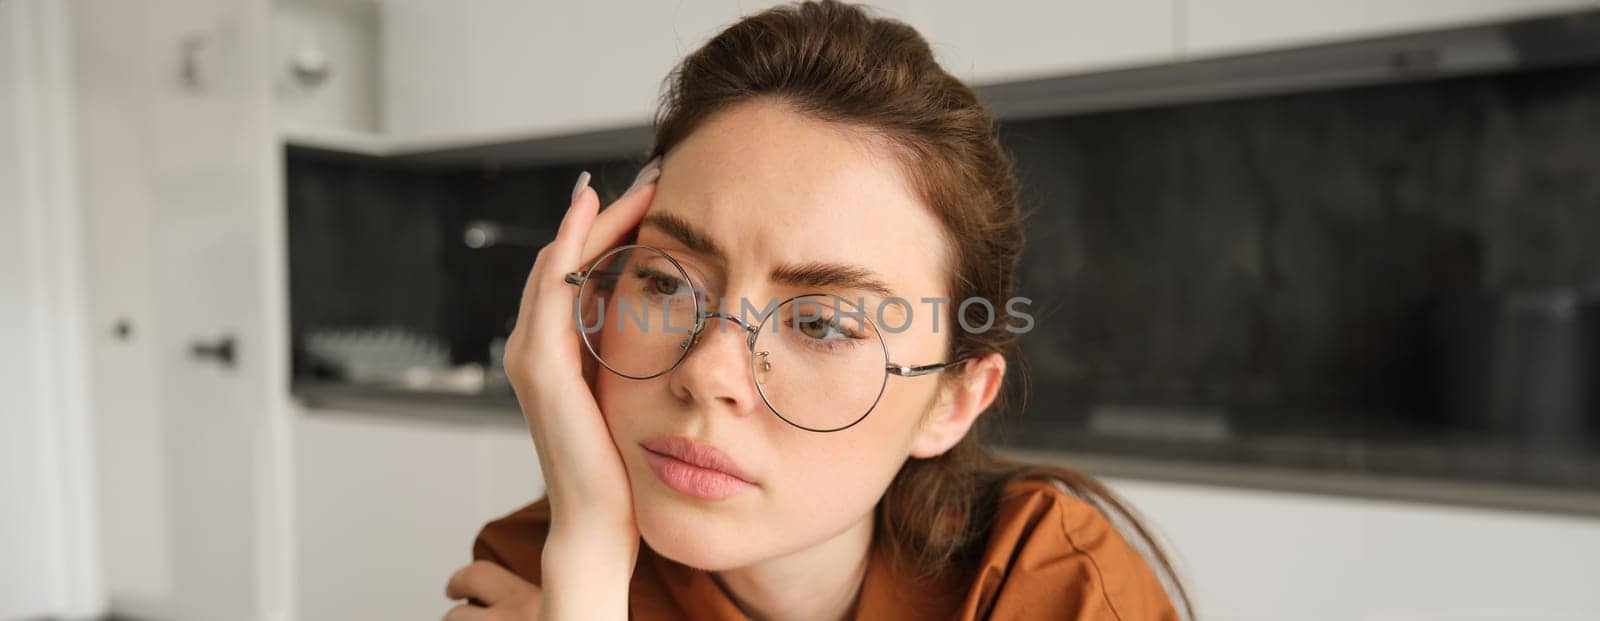 Portrait of woman thinking about something concerning, wearing glasses, touching head, sitting troubled at home.